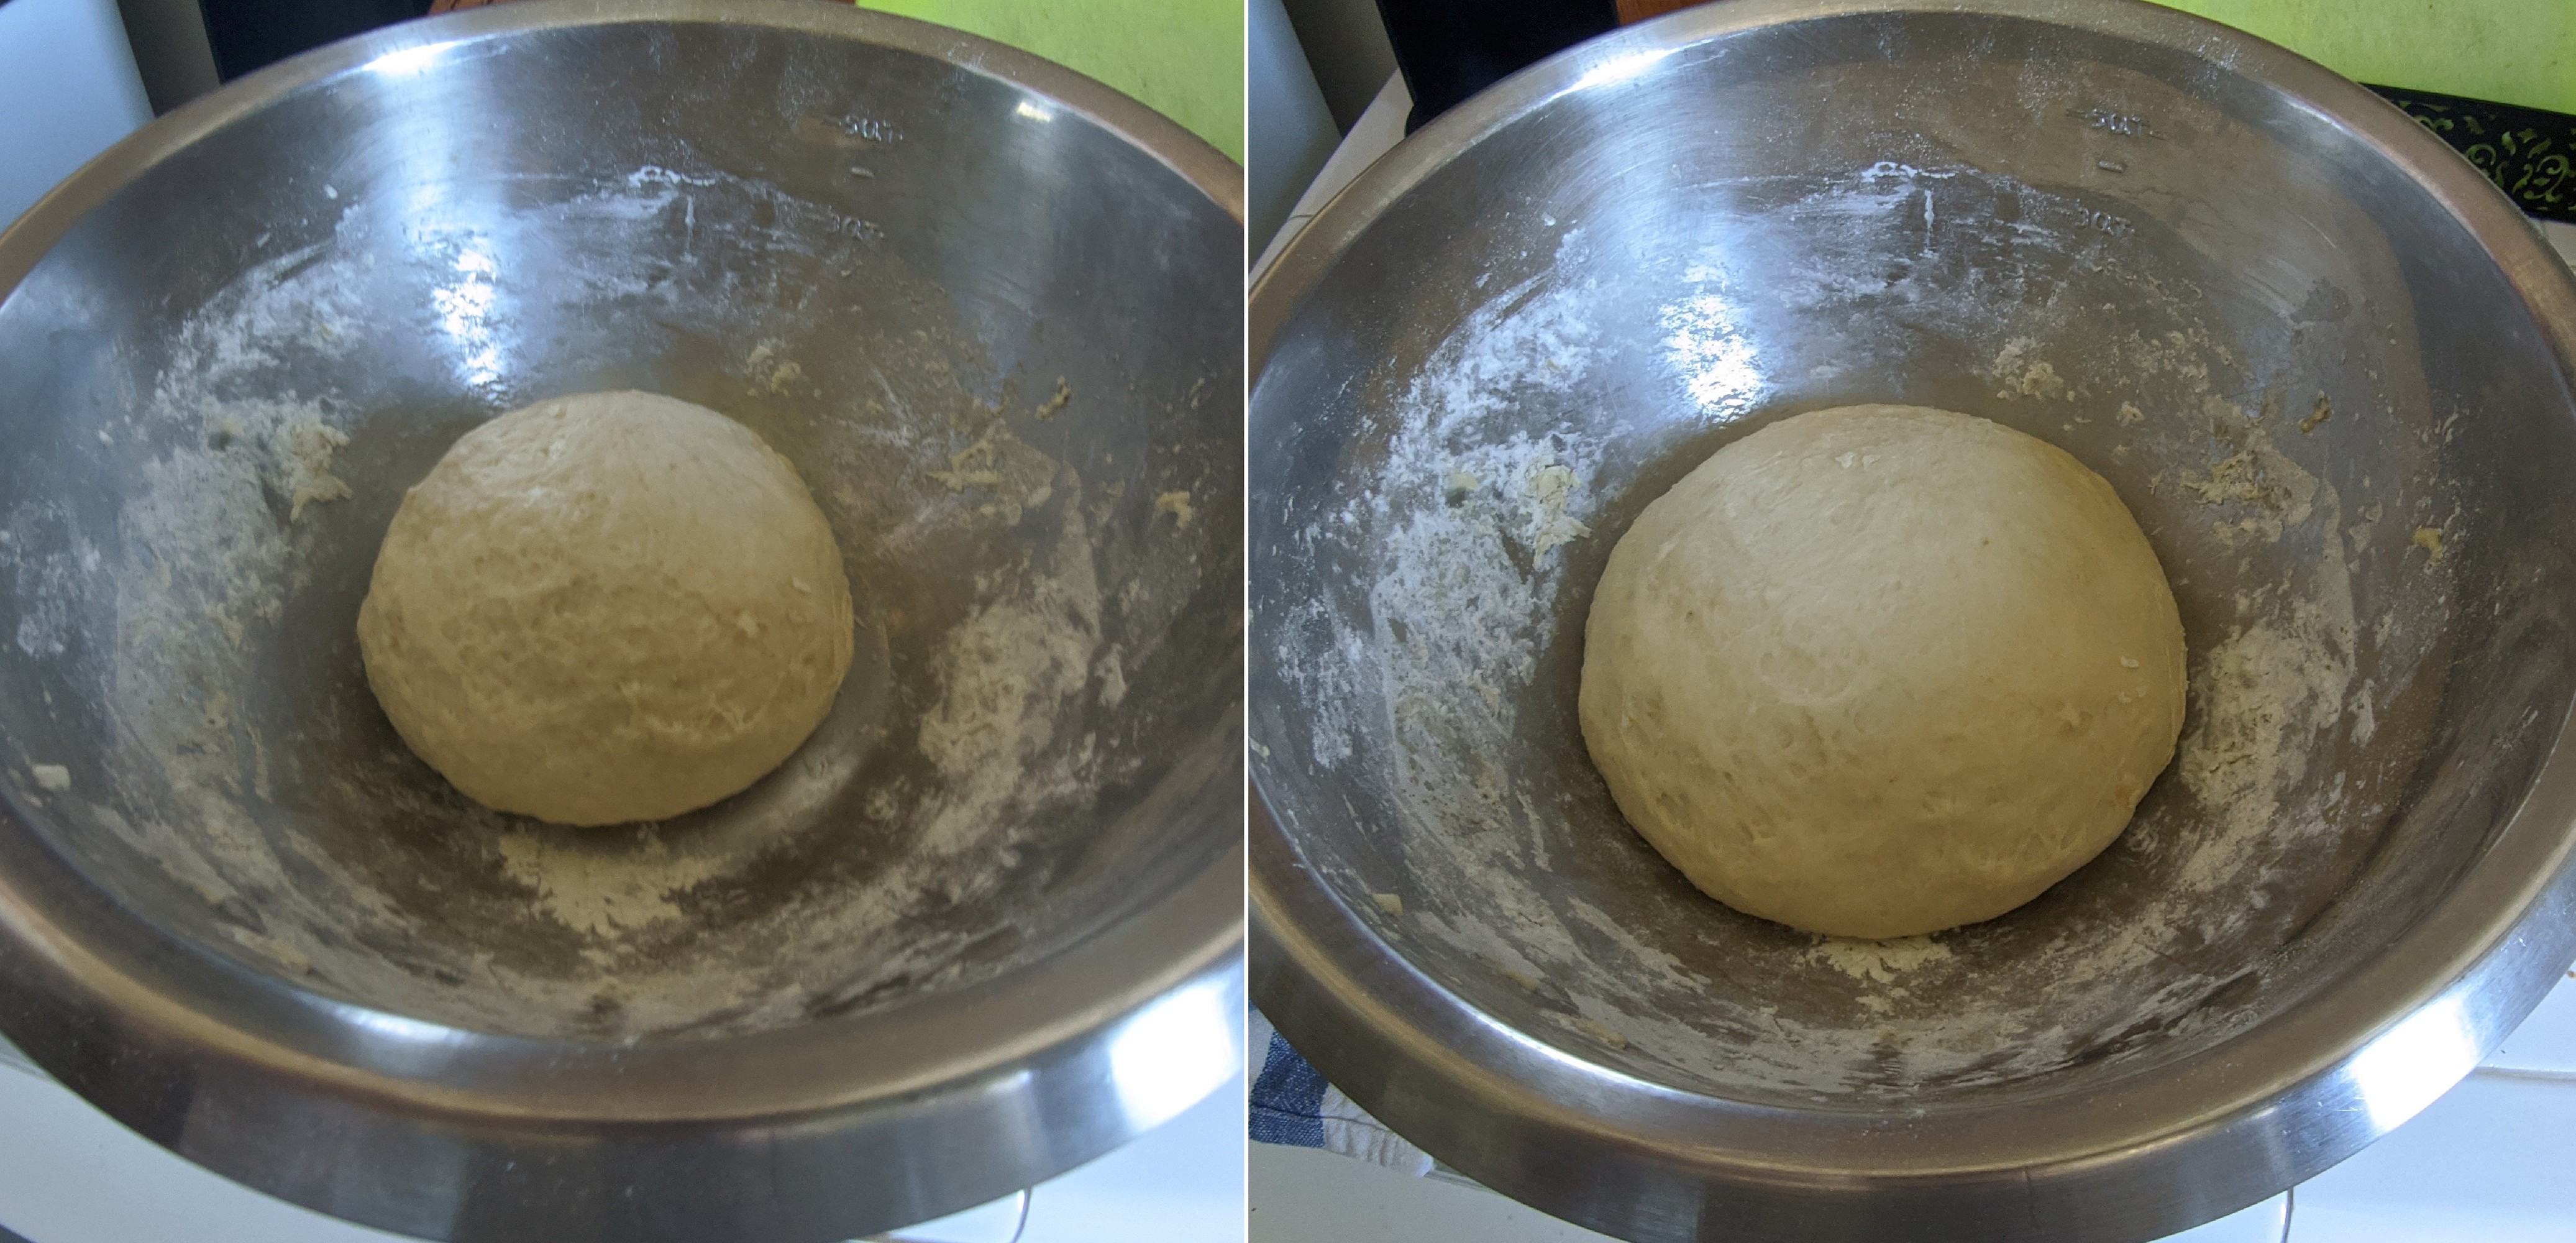 2 pictures side-by-side. Pic 1 is a mixing bowl with a small ball of dough in it. Pic 2 is the  mixing bowl with a larger ball of dough in it.